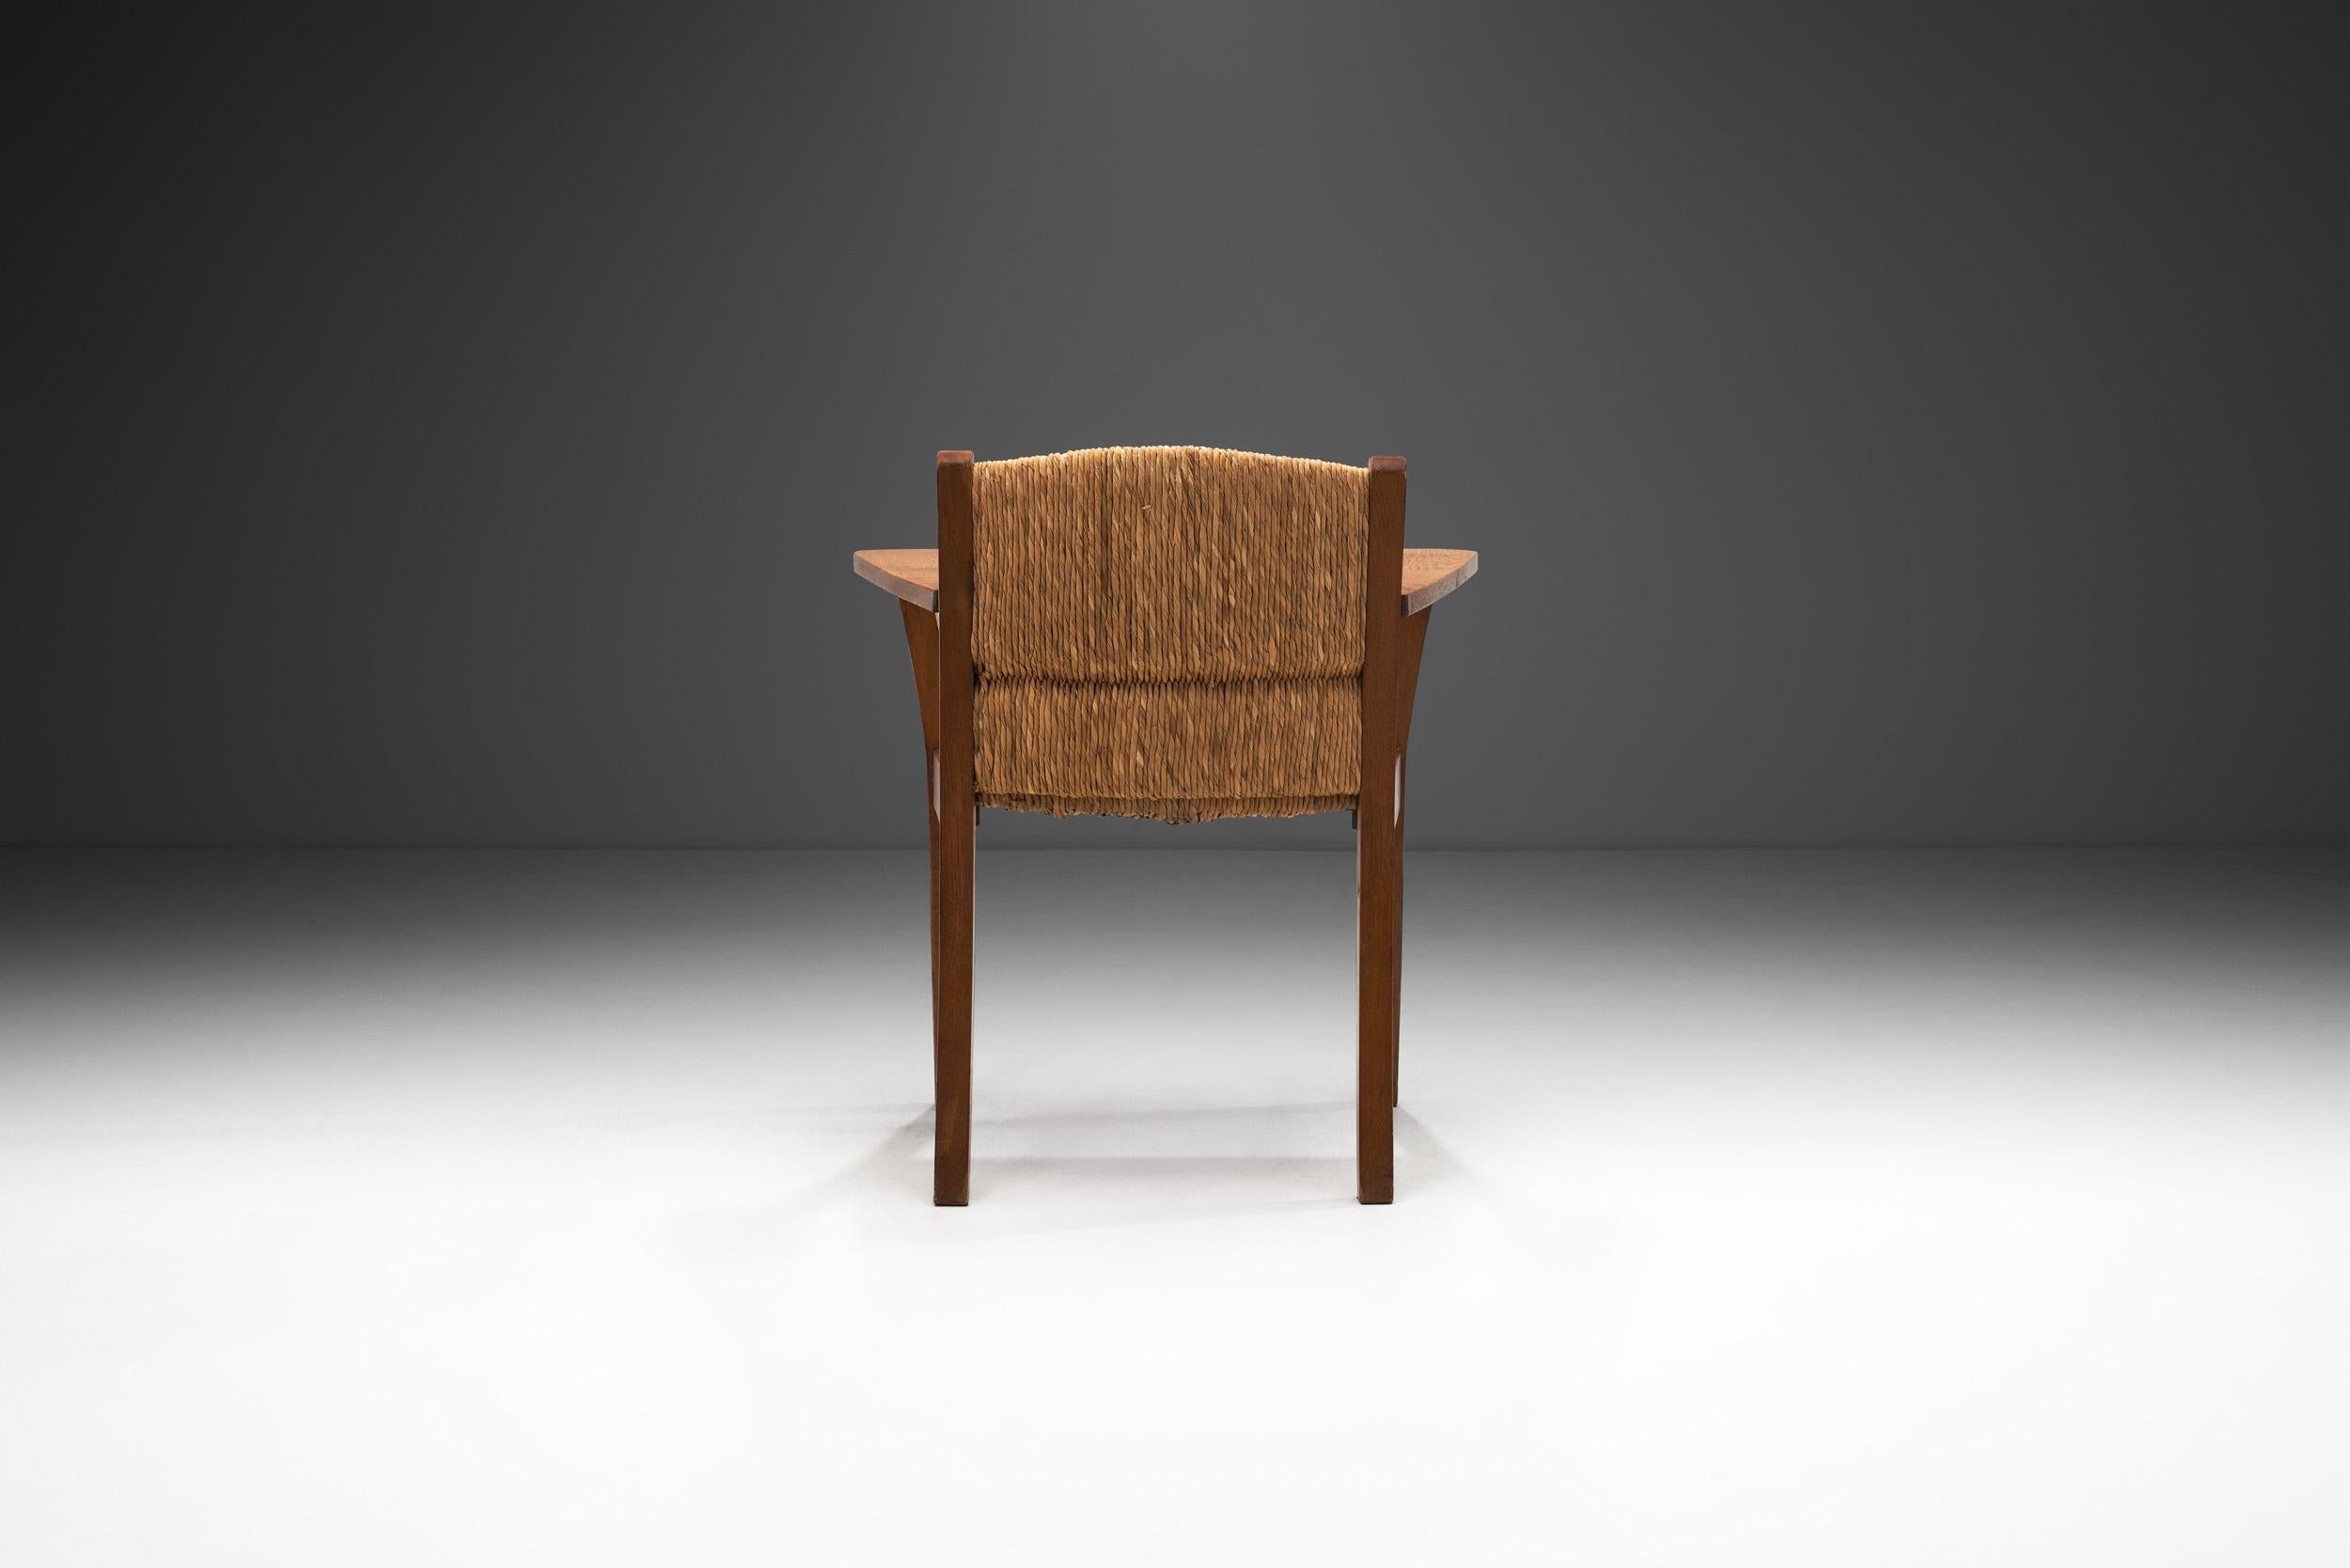 Early 20th Century Oak Worpsweder Armchair by Willi Ohler for Erich Schultz, Germany 1920s